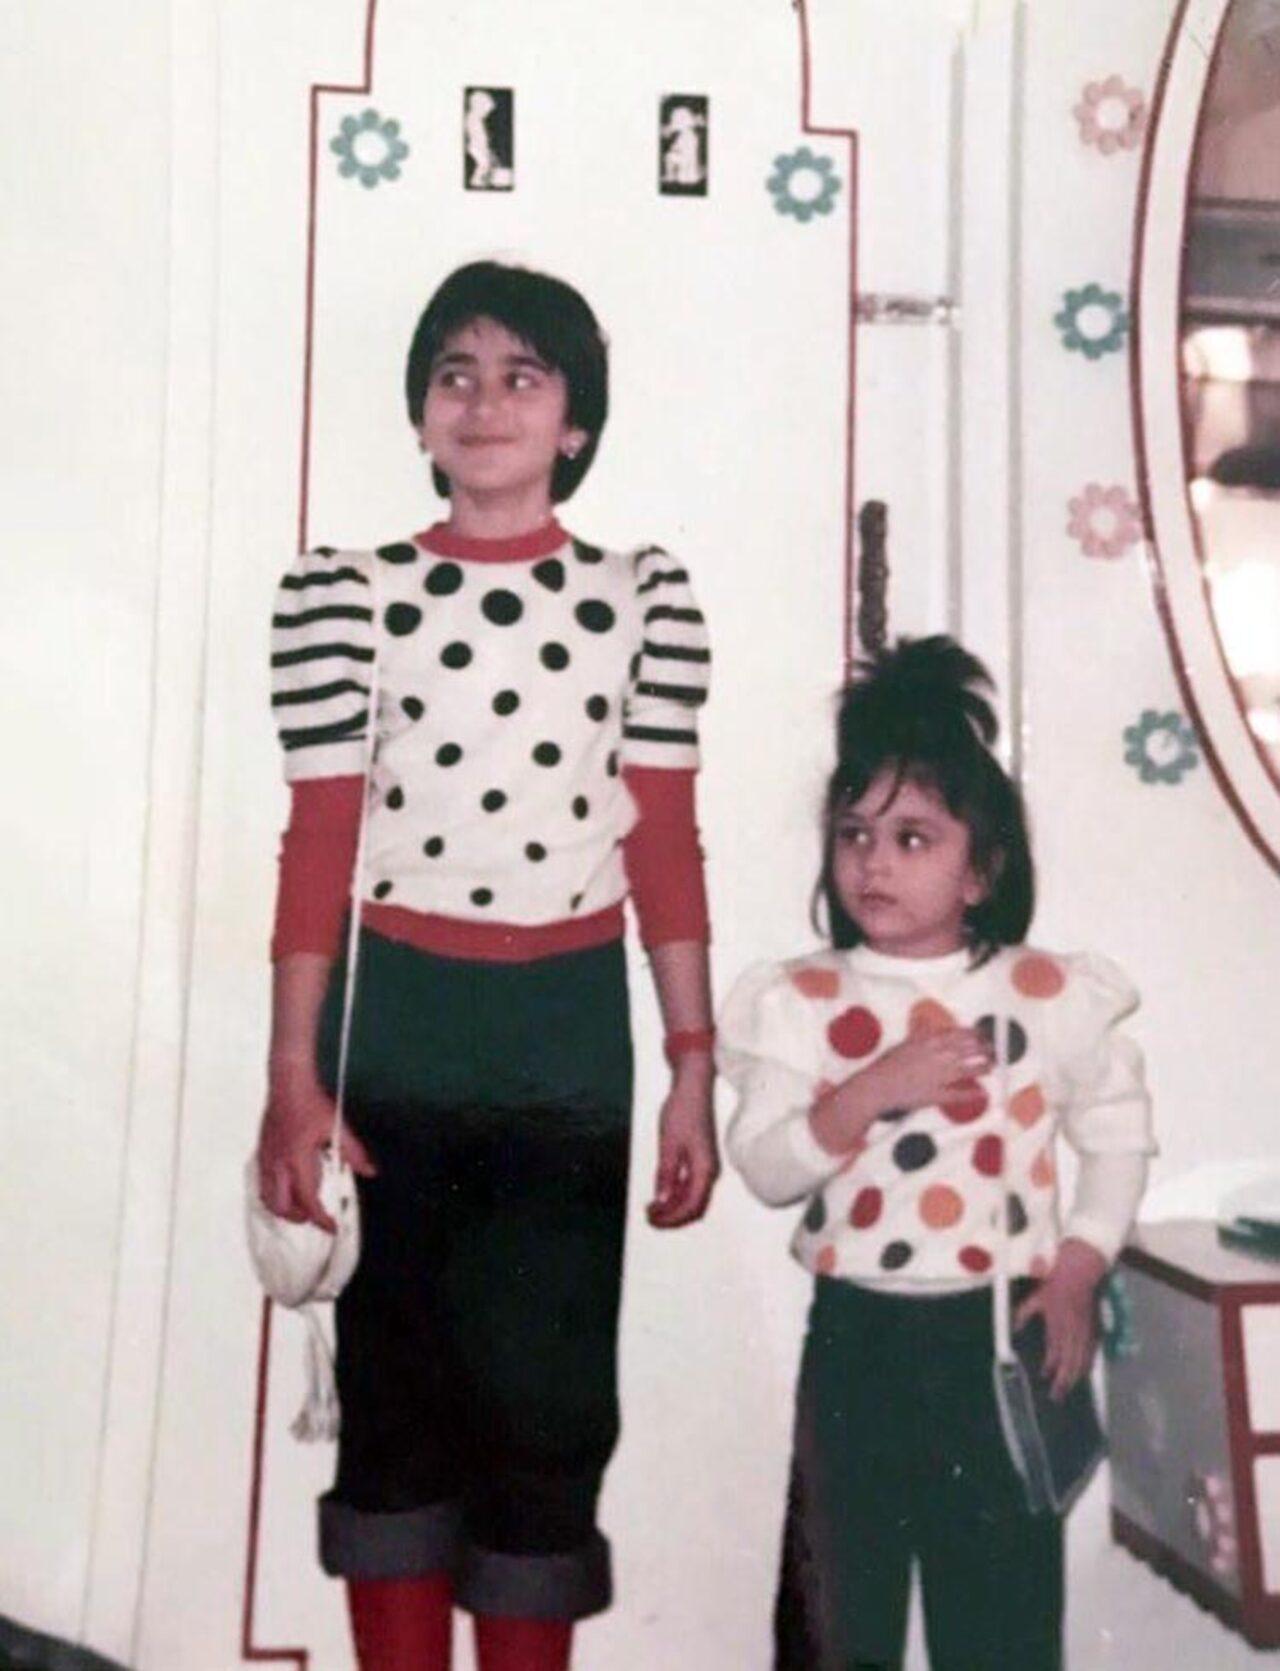 The divas, Karisma and Kareena, showcased their flair for fashion from a young age, as indicated by a throwback photo shared by Karisma. She captioned the delightful picture with, “Happy birthday to my darling baby sister and best friend.”